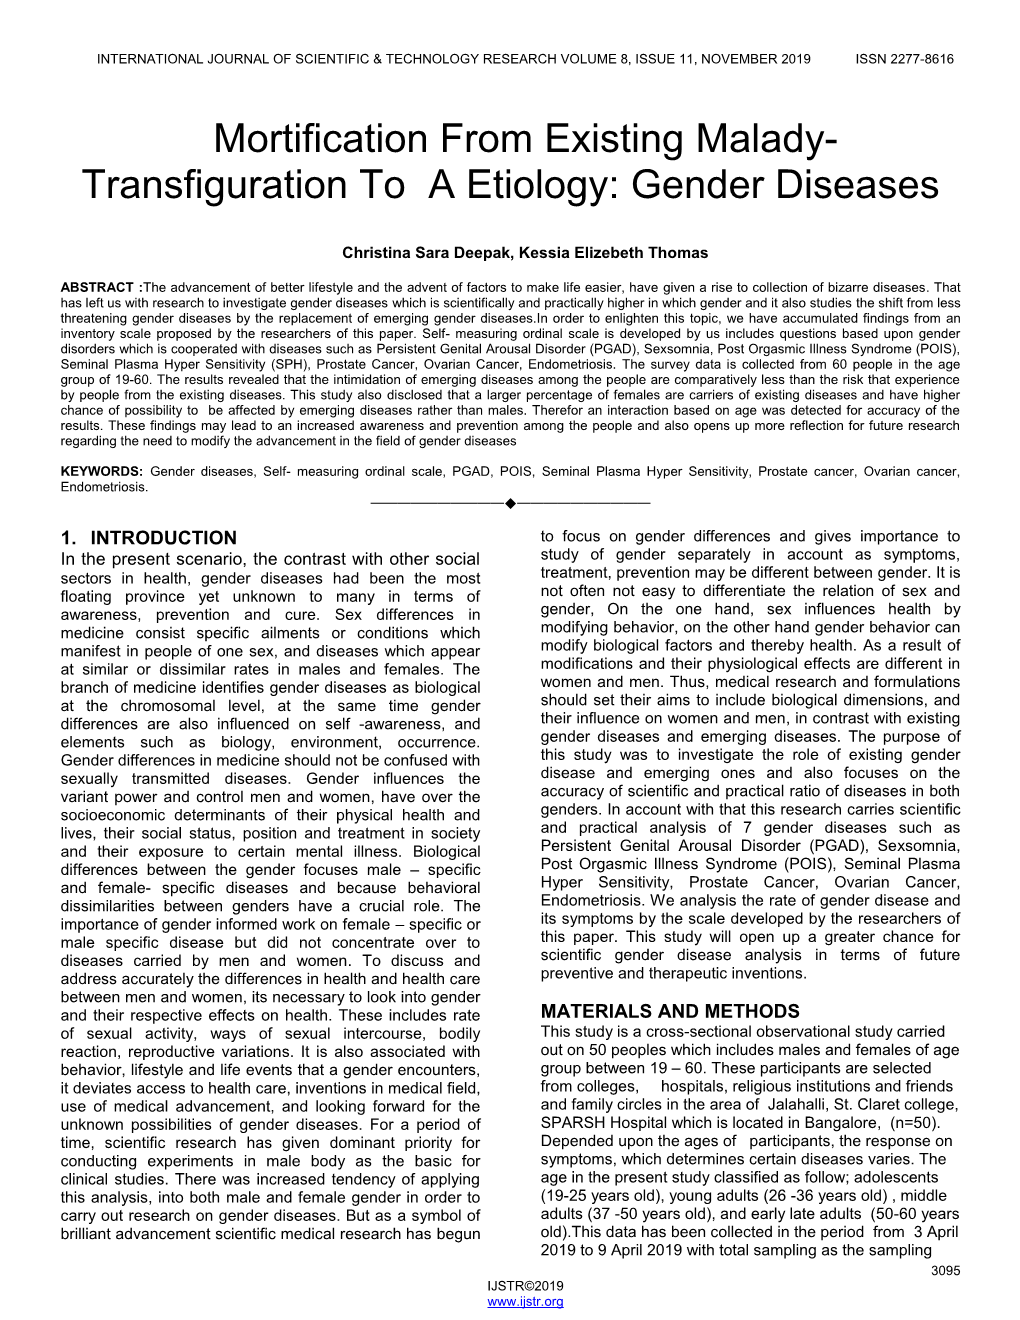 Mortification from Existing Malady- Transfiguration to a Etiology: Gender Diseases